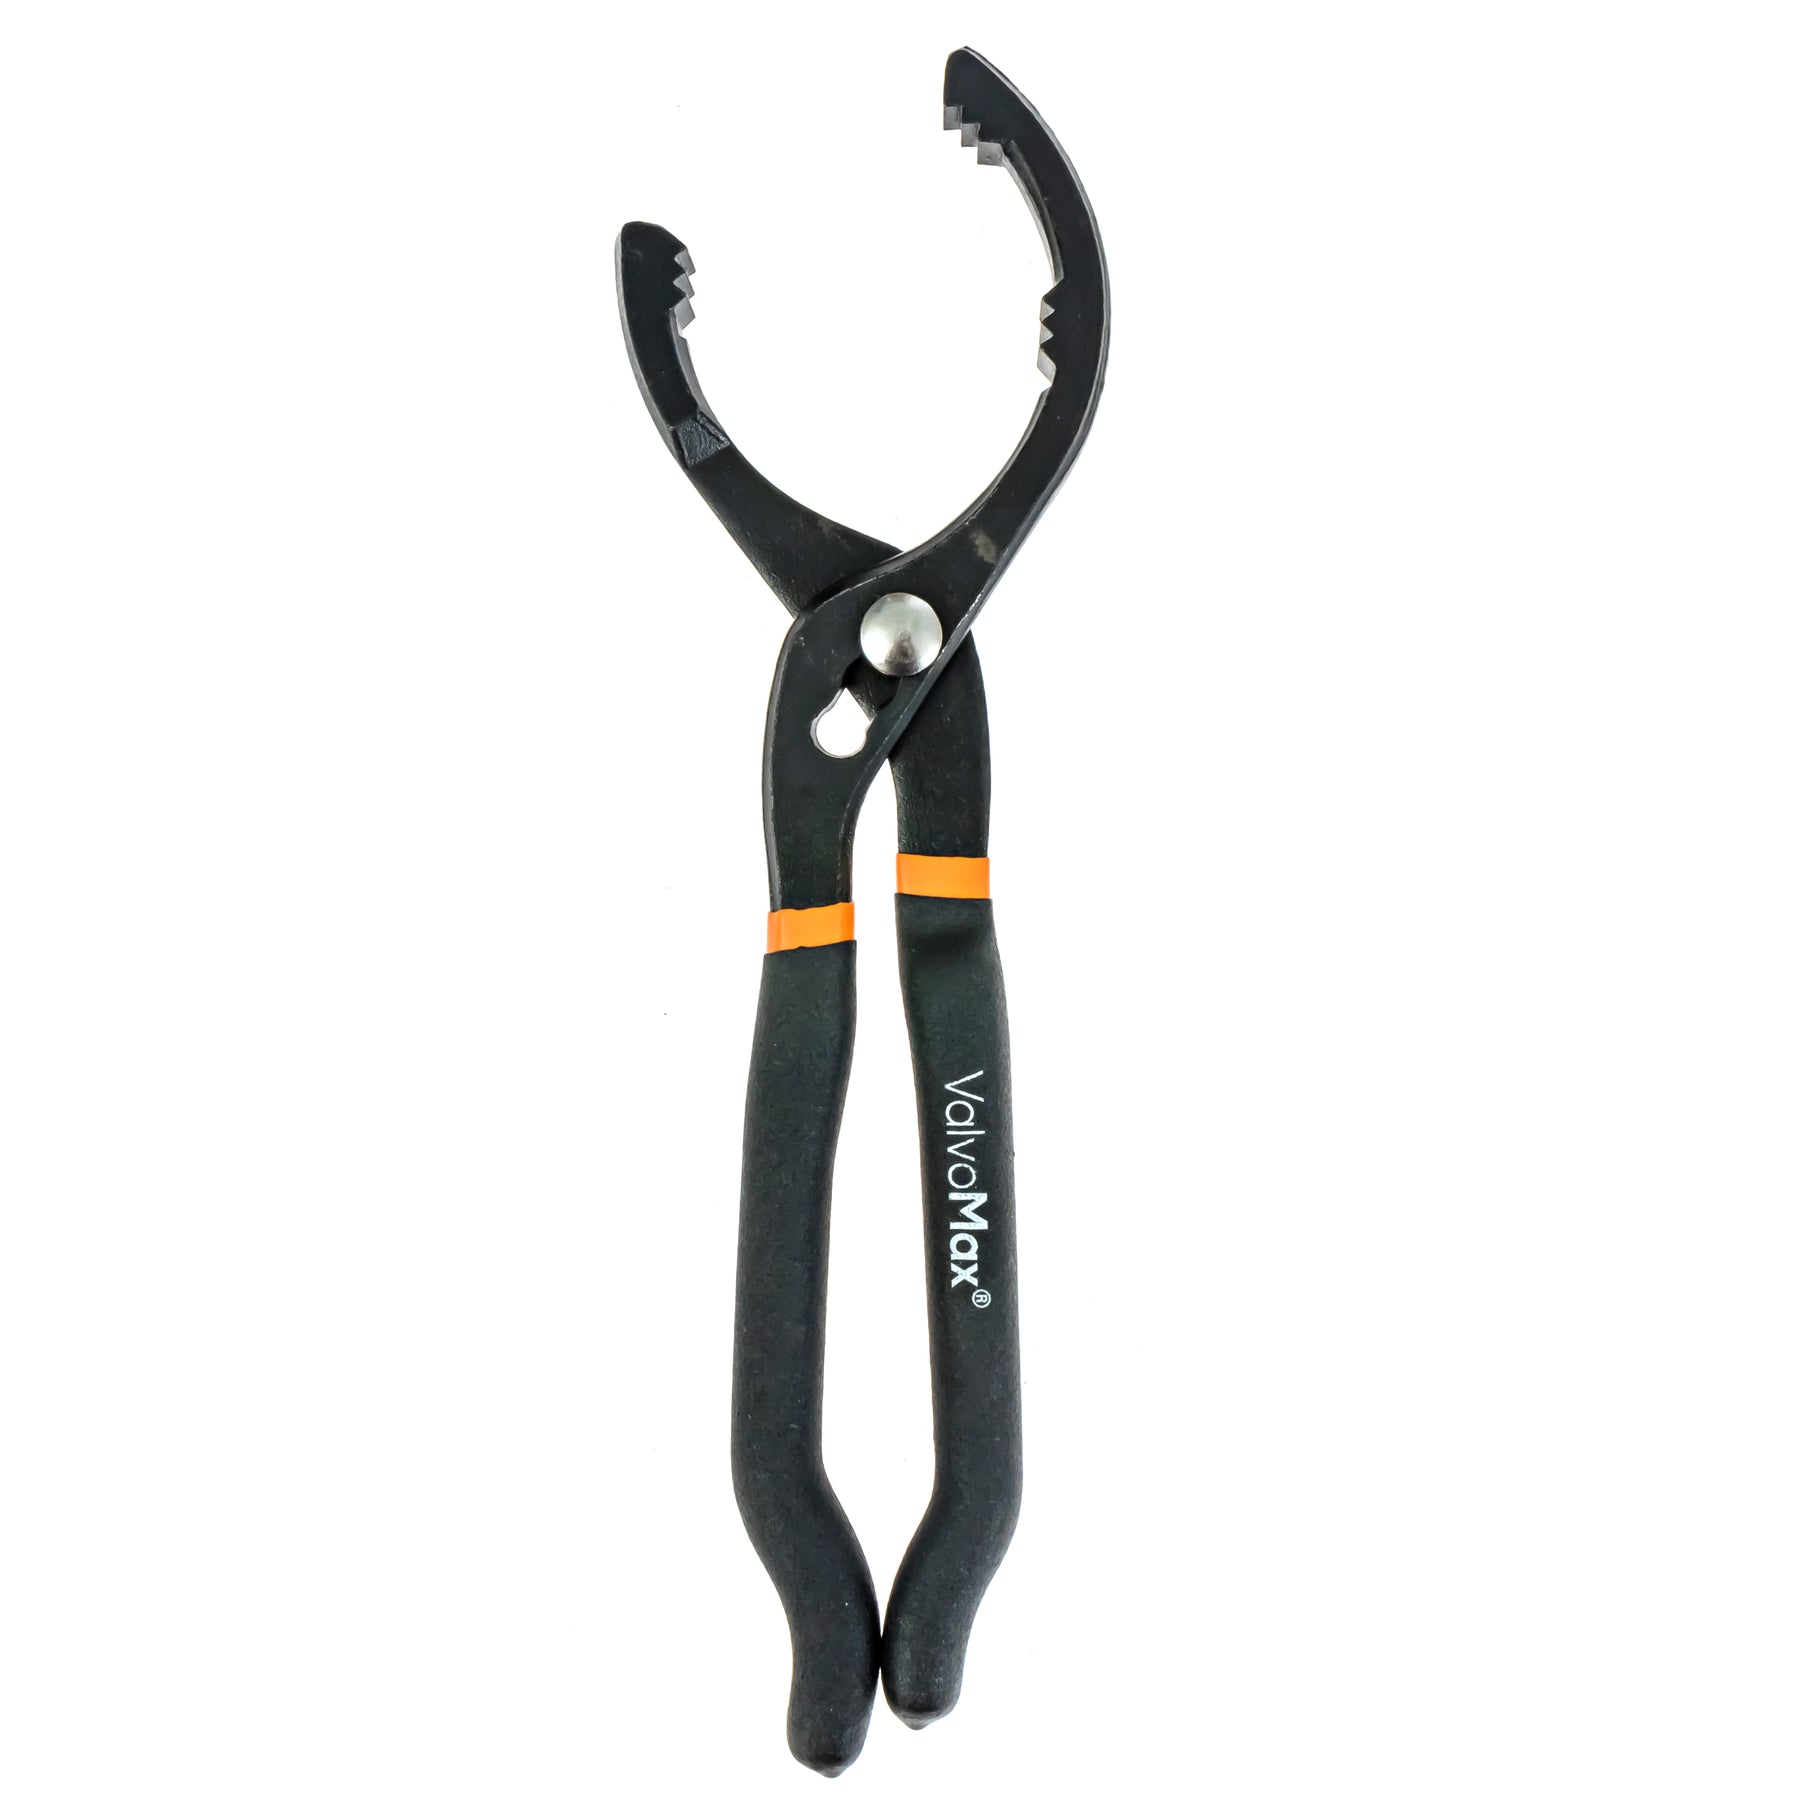 Adjustable Oil Filter Wrench